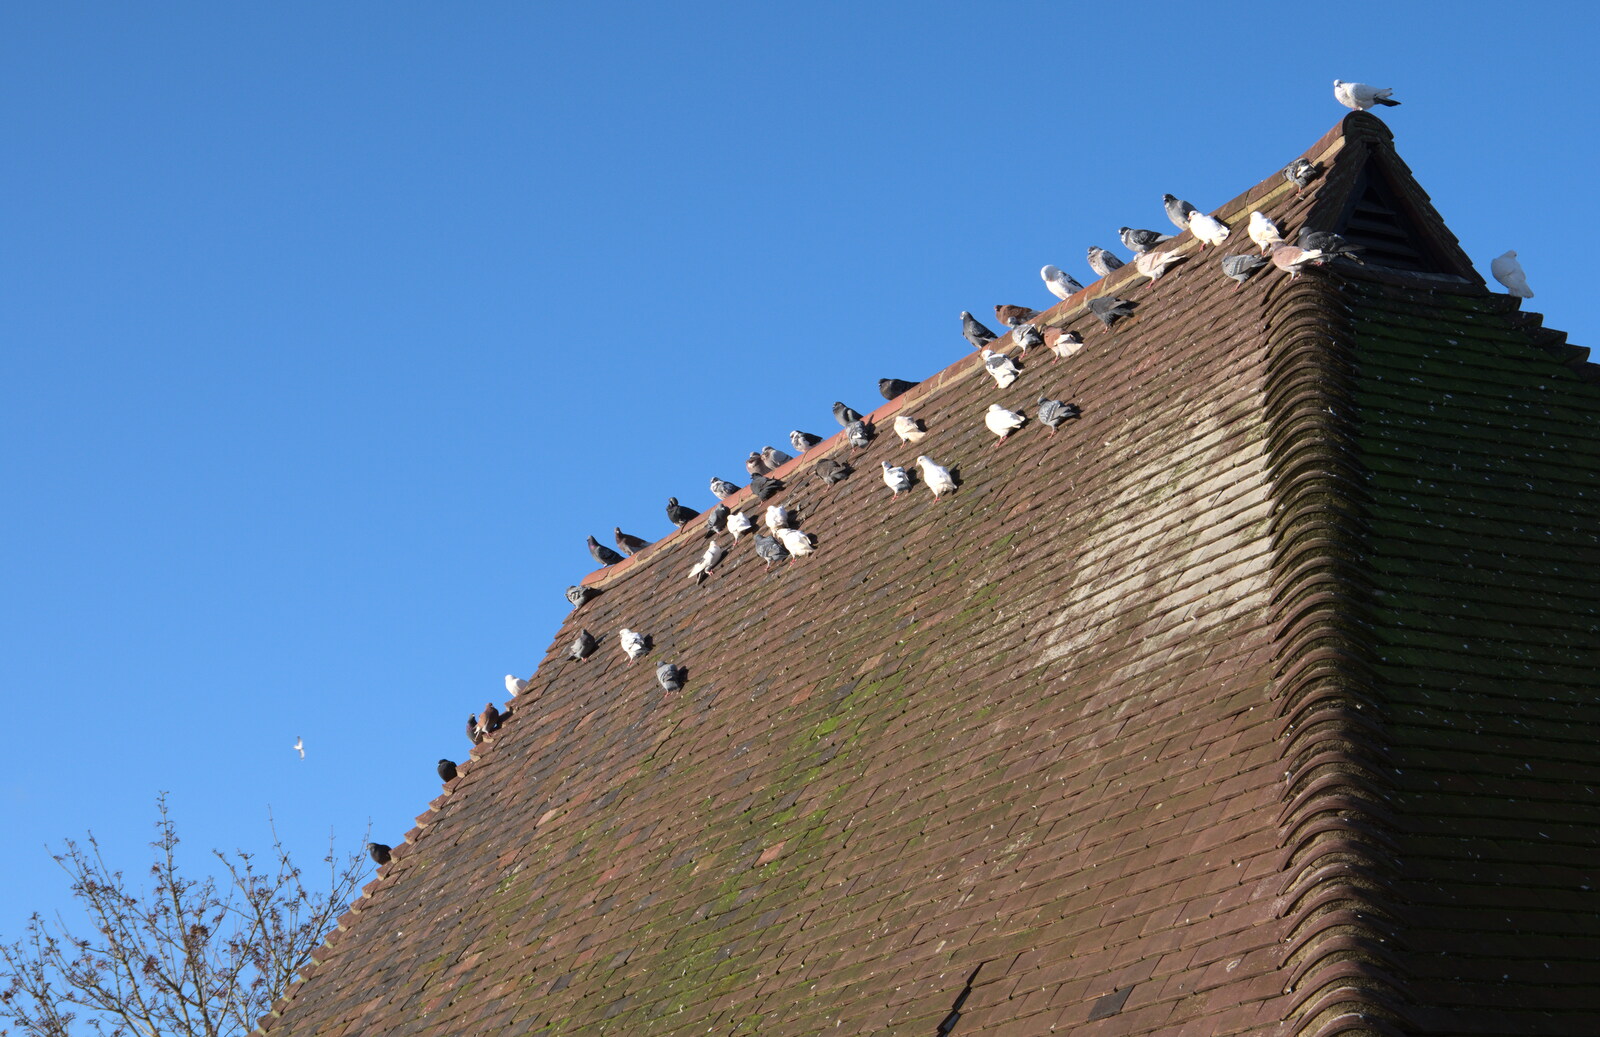 Hundreds of pigeons cling to the roof of the bogs from Joe Wicks and Diss on Saturday, Norfolk - 19th December 2020